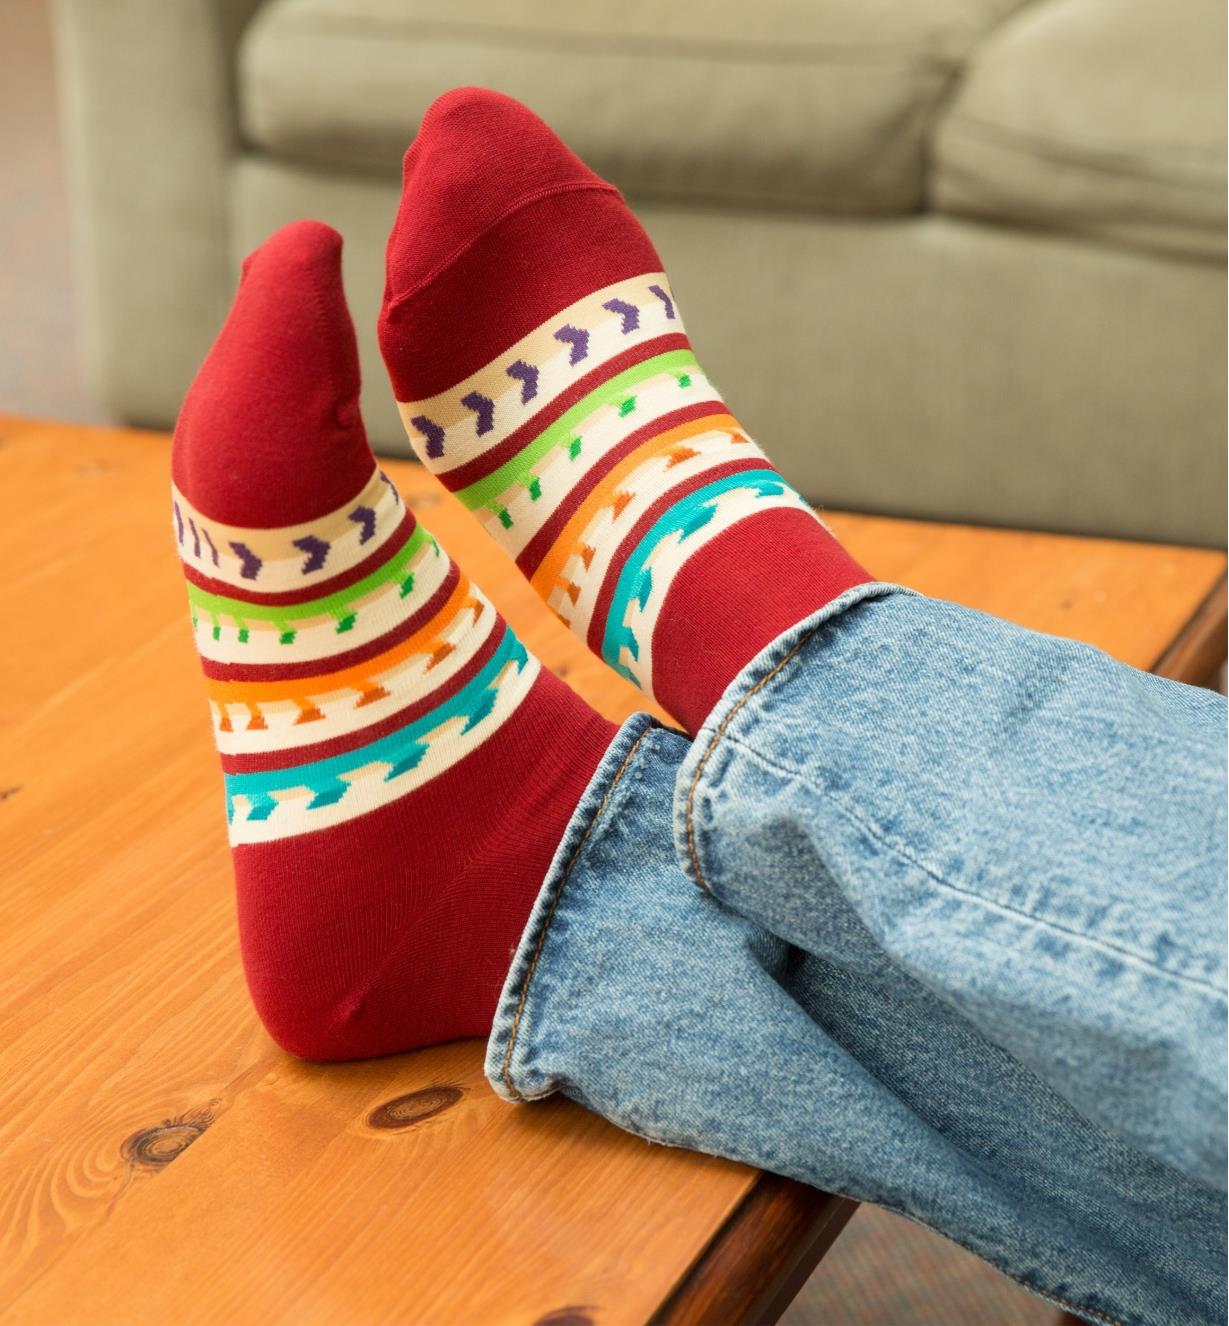 A person's feet clad in Lee Valley Woodworker's Socks propped on a coffee table